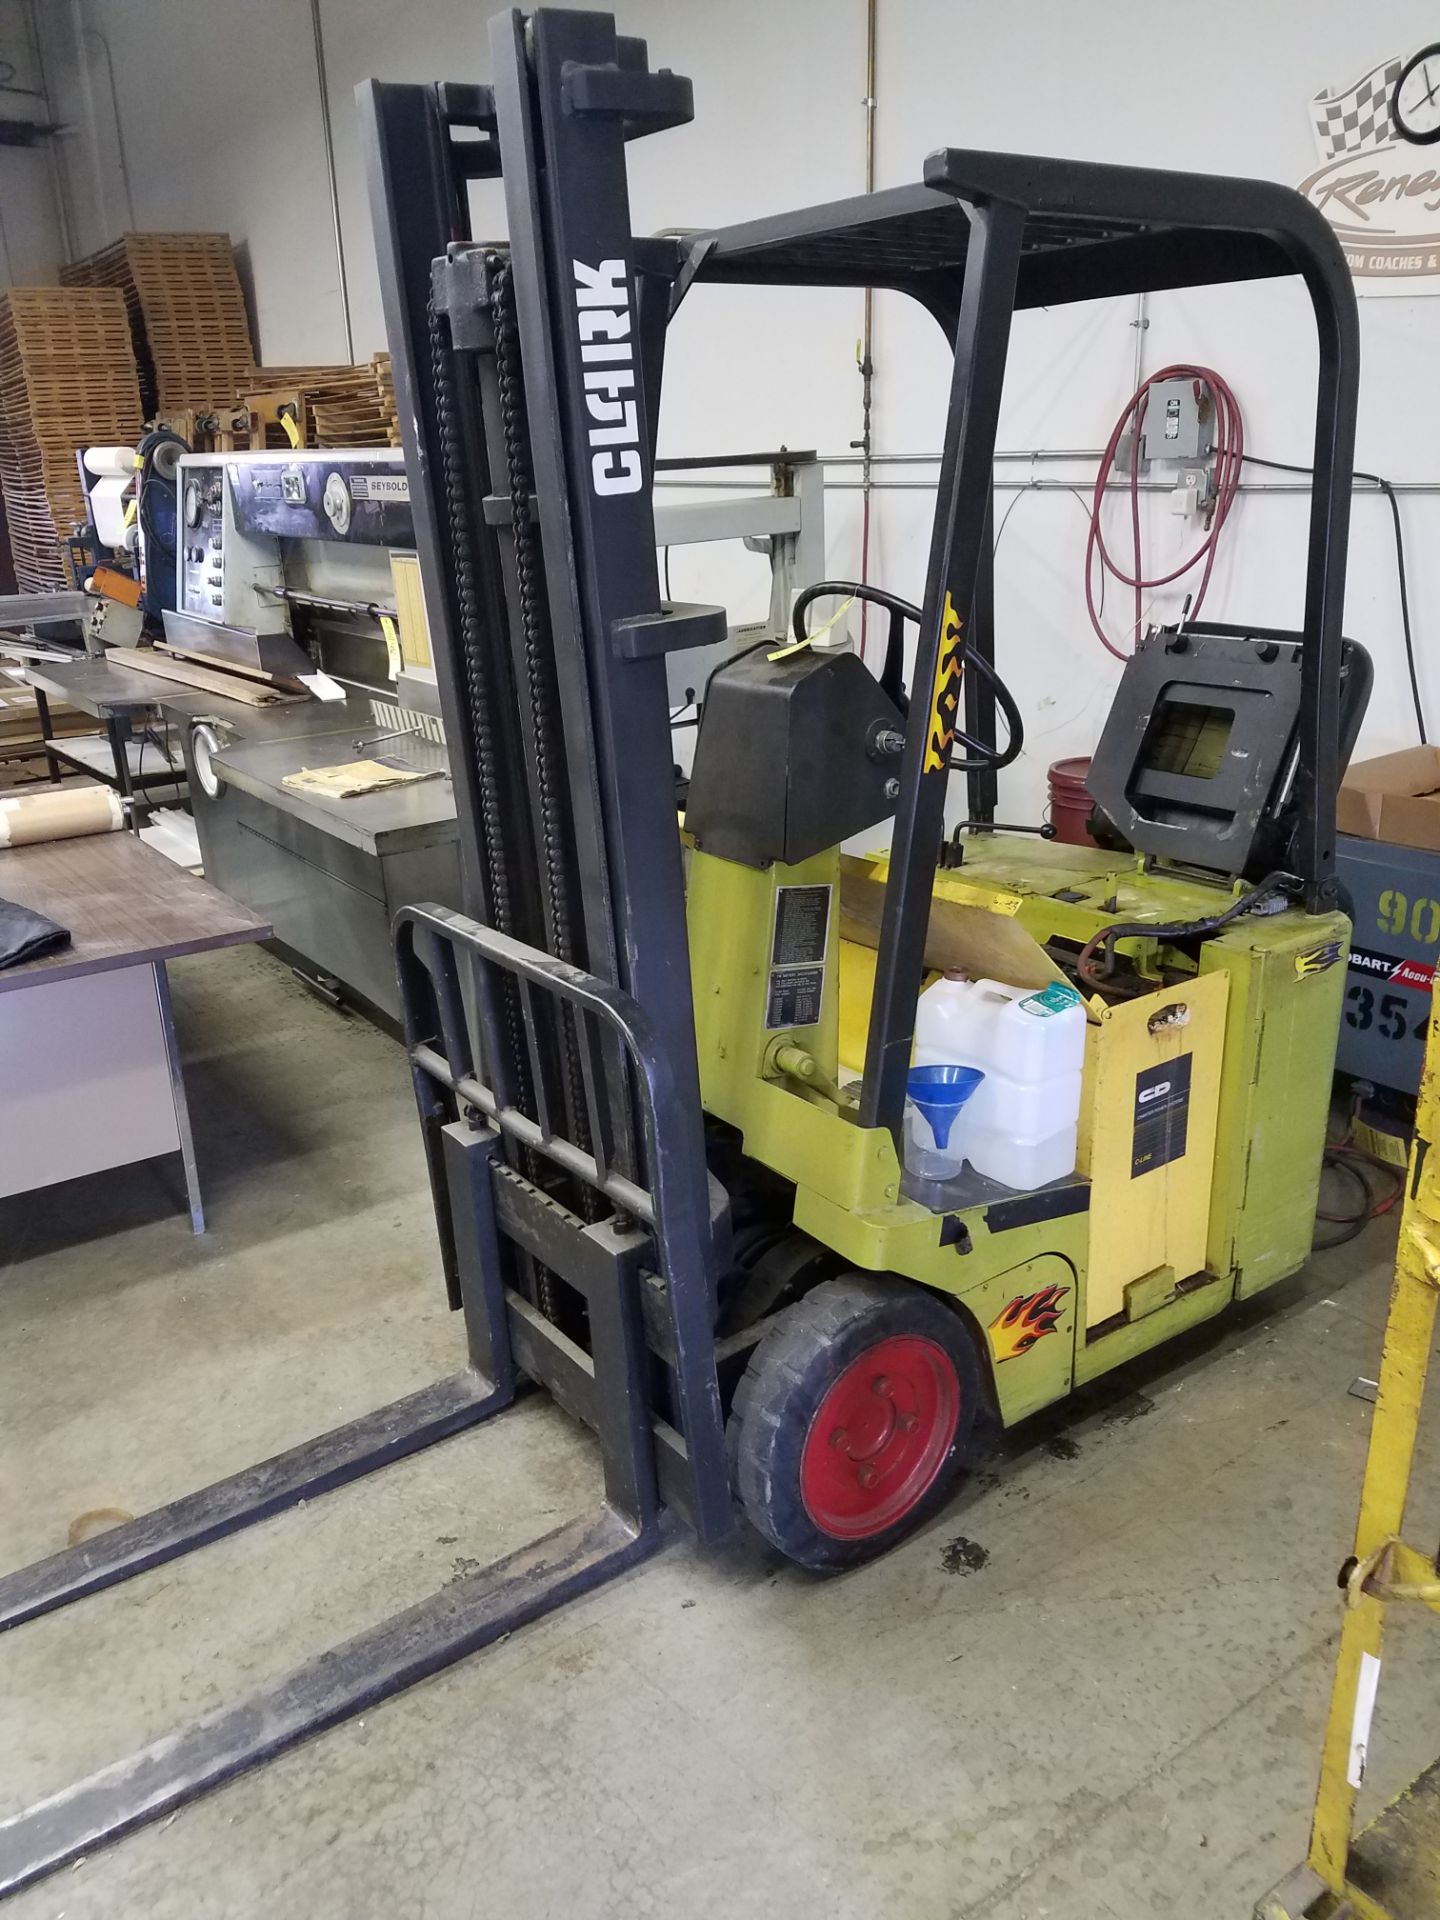 CLARK ELECTRIC FORK TRUCK S#TW25-290-962868, 2500 LB CAPACITY, 2 STAGE MAST, SOLID TIRES (NEEDS